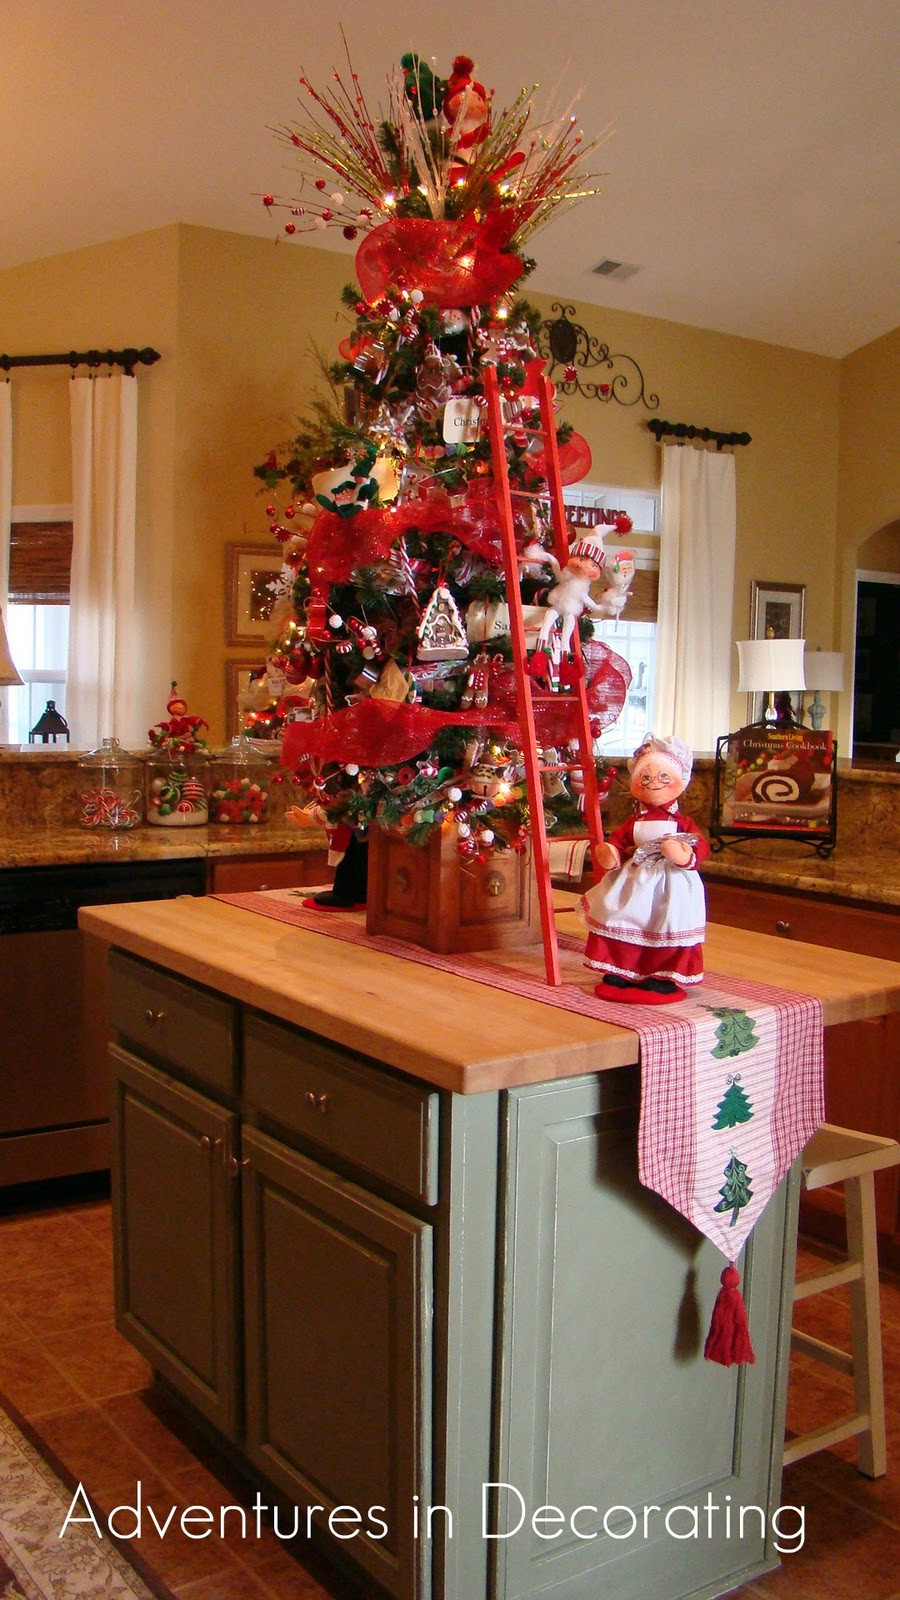 Kitchen Christmas Ornaments
 Adventures in Decorating Whimsical Christmas Kitchen